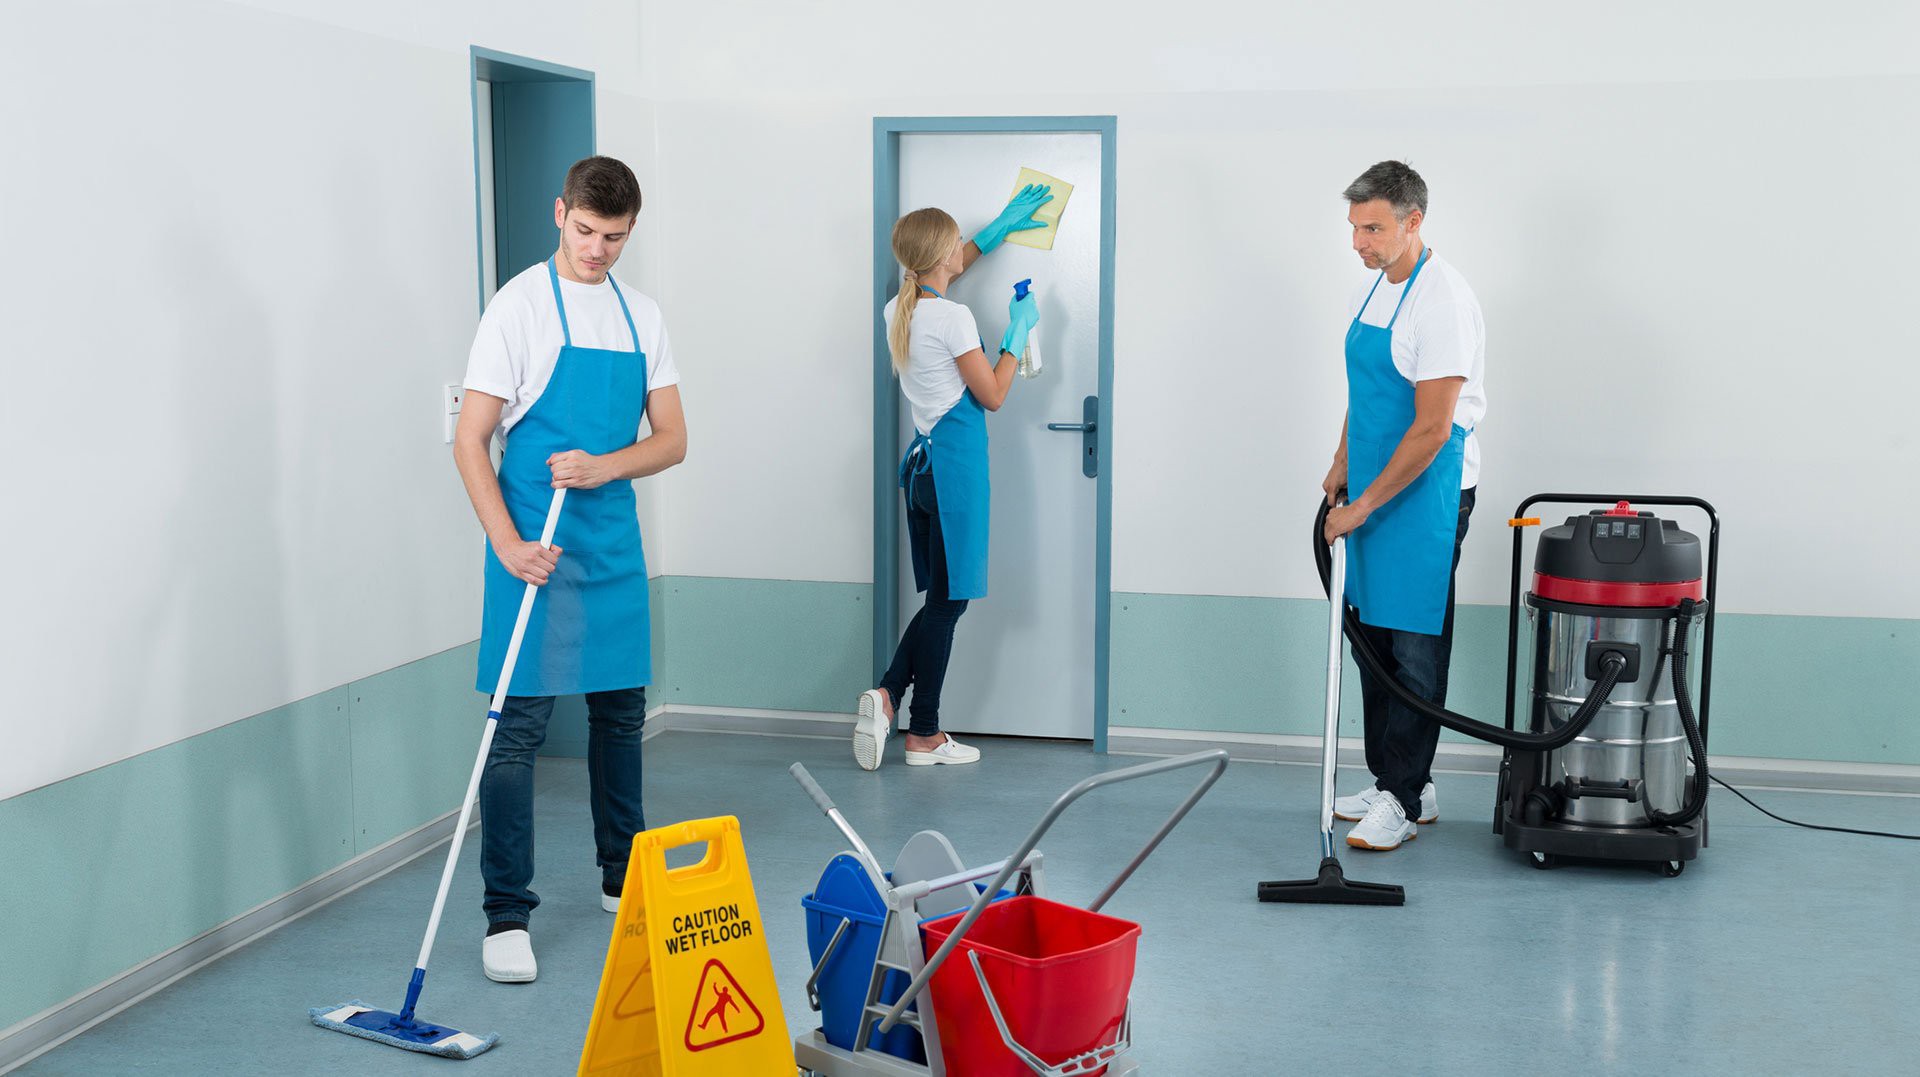 Commercial cleaning company